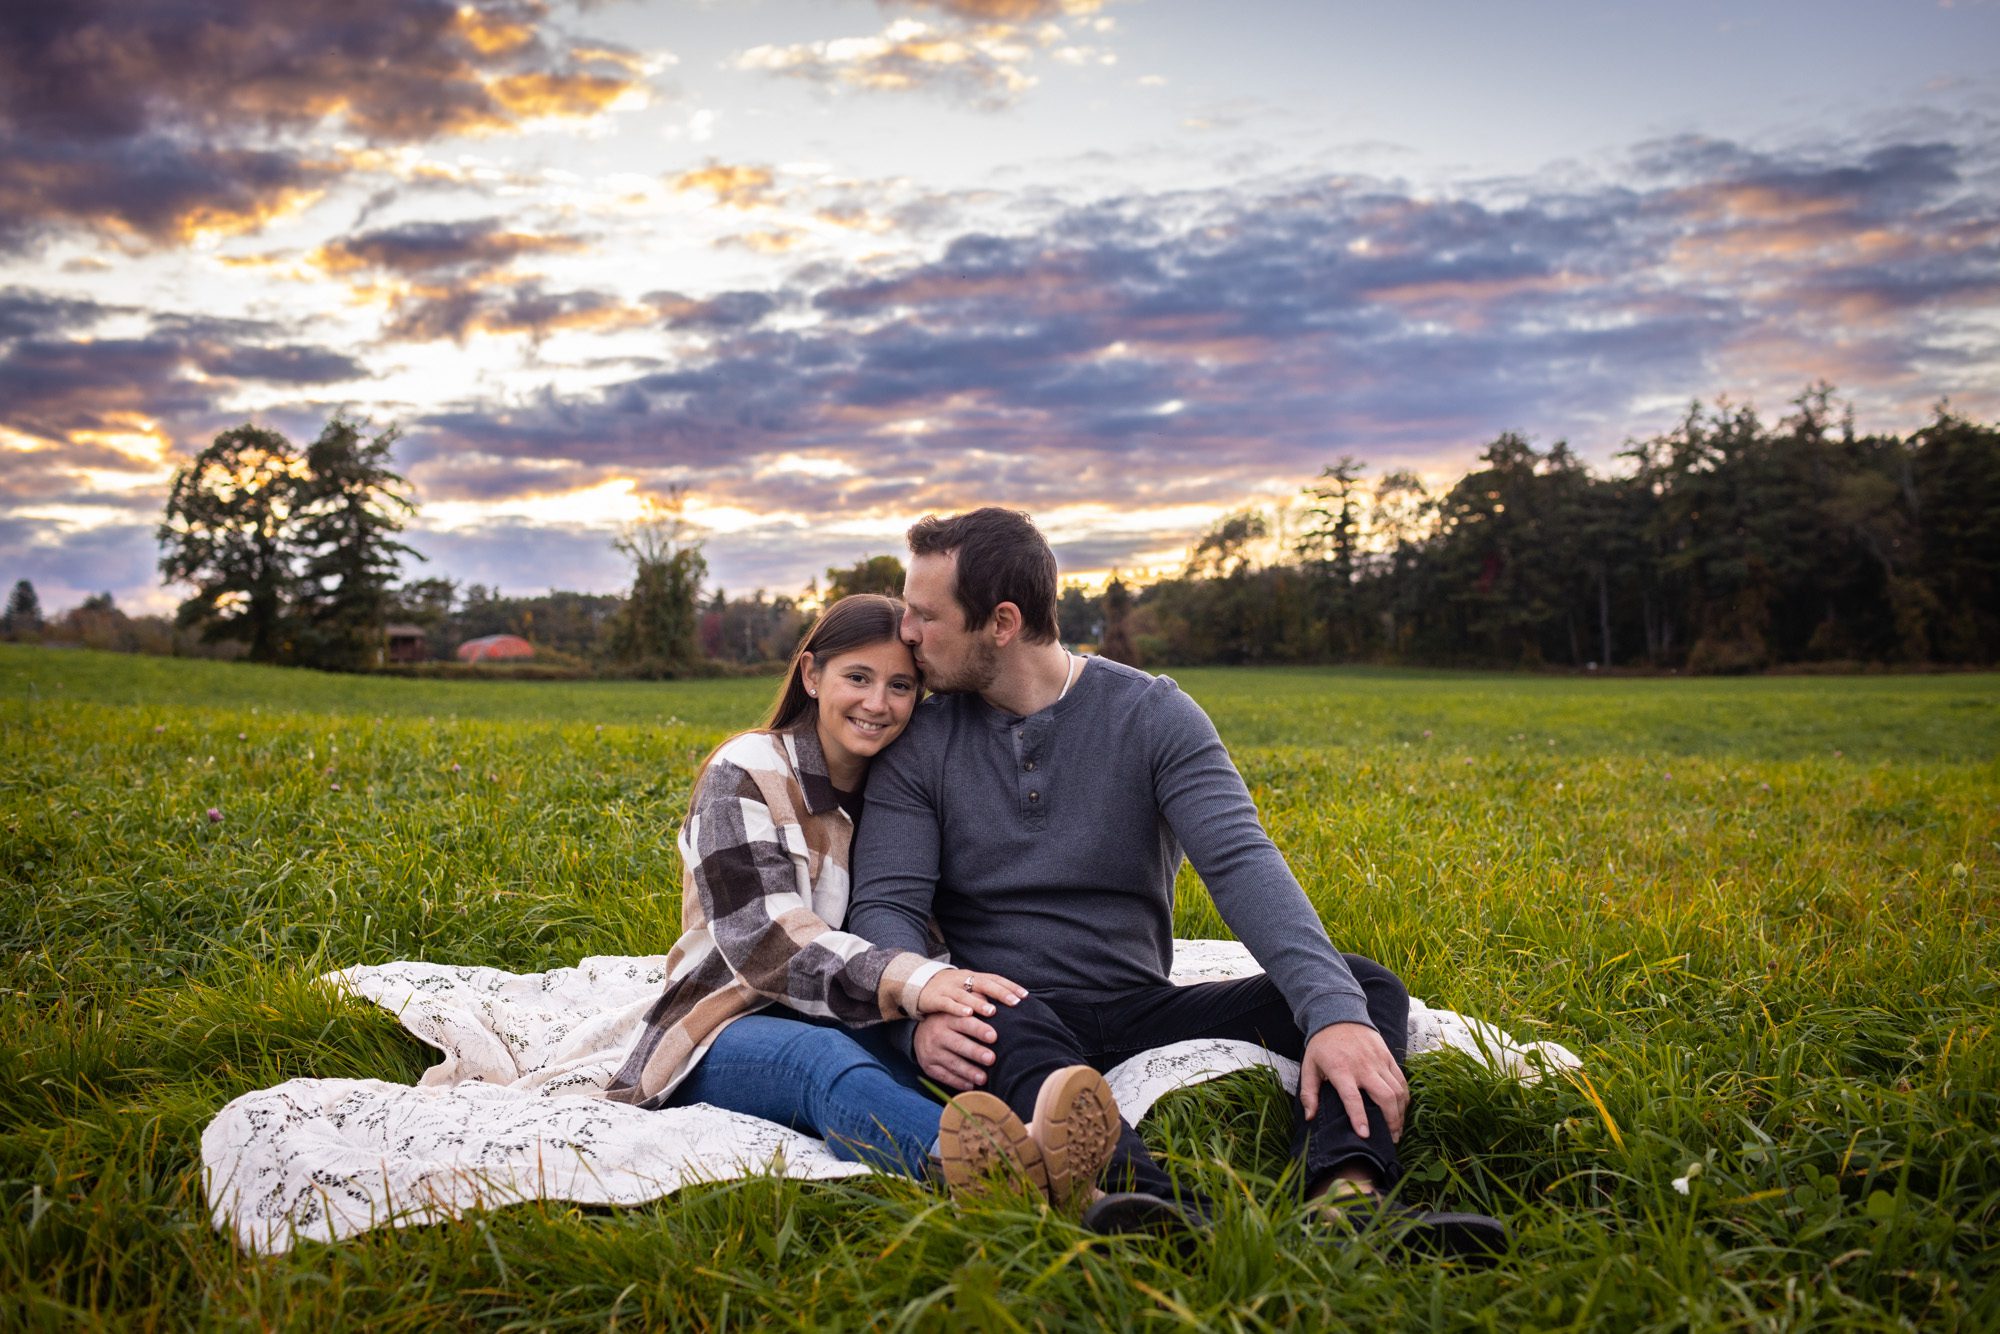 engagement-Photos-at-sunset-worcester-MA -56